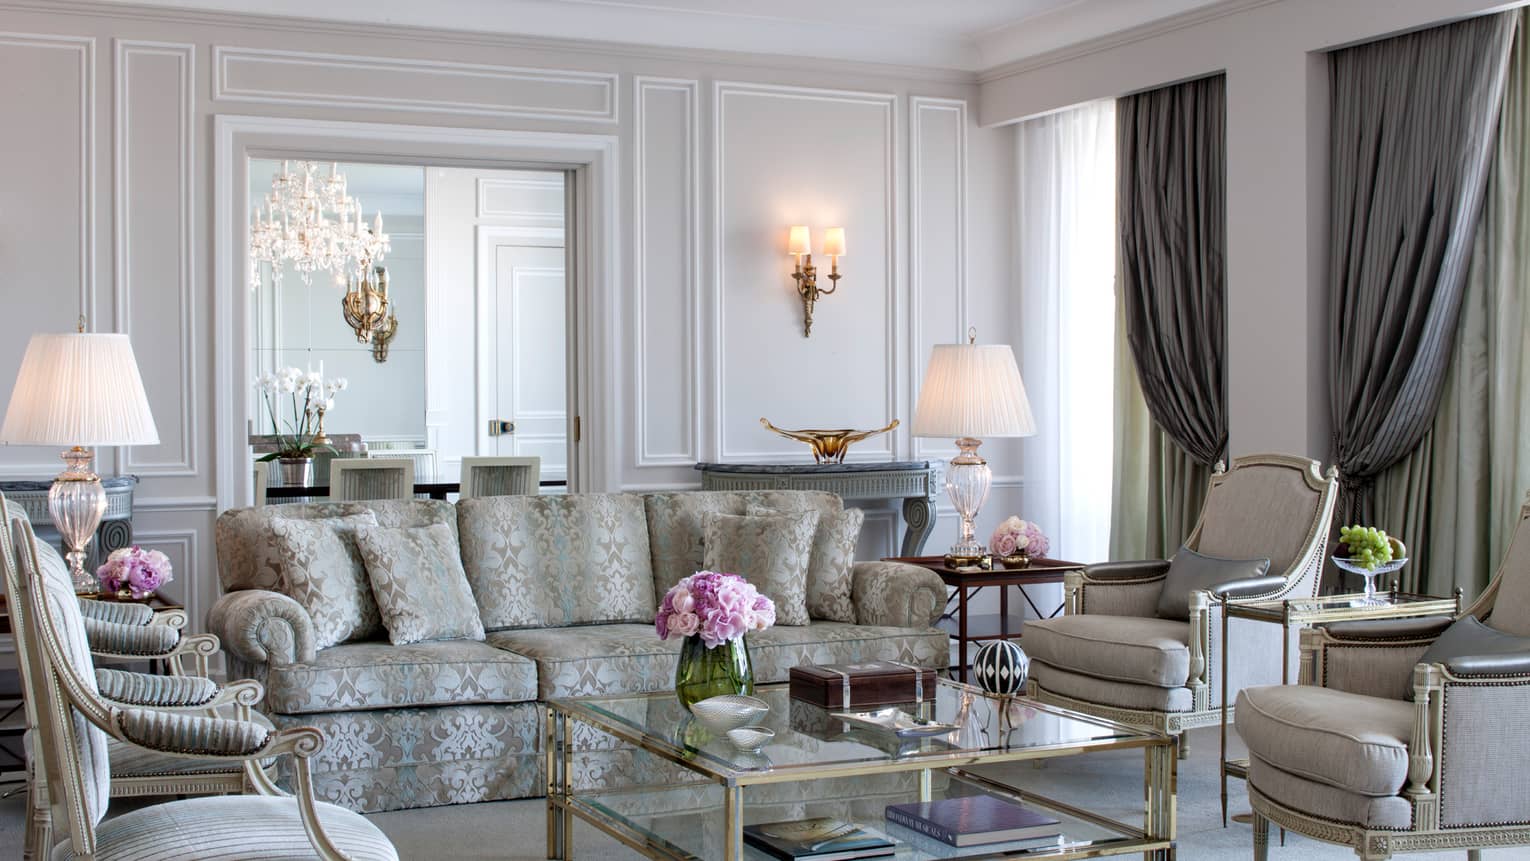 Royal Suite bright, elegant living room with blue-and-grey satin sofa, armchairs, glass coffee table with gold trim, white walls